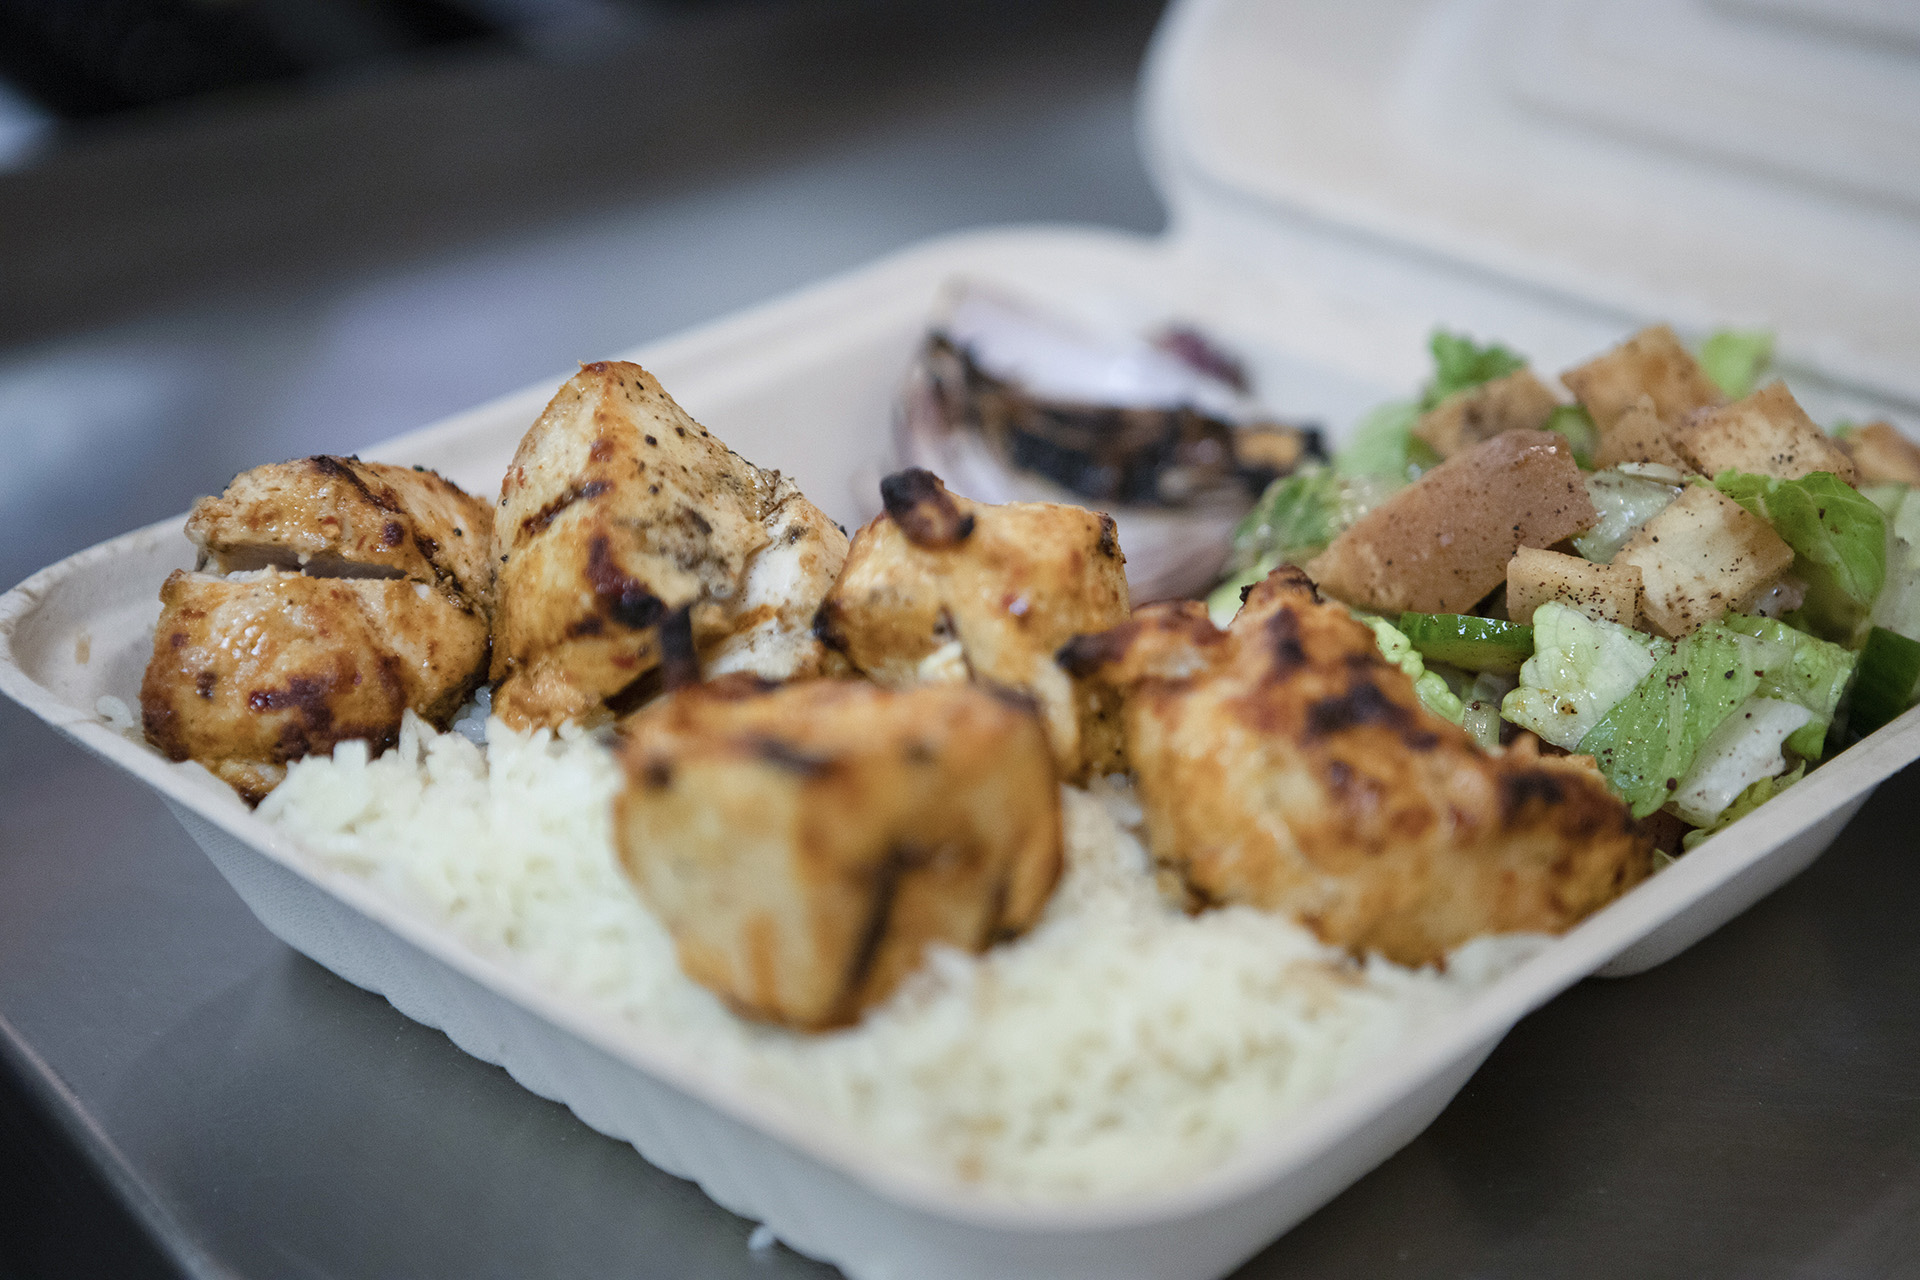 The Chicken Kabab (white meat) platter is presented on a smooth metallic table top. The kabab is served over a bed or rice and accompanied by sides of fresh grilled vegetables and a fattoush salad.